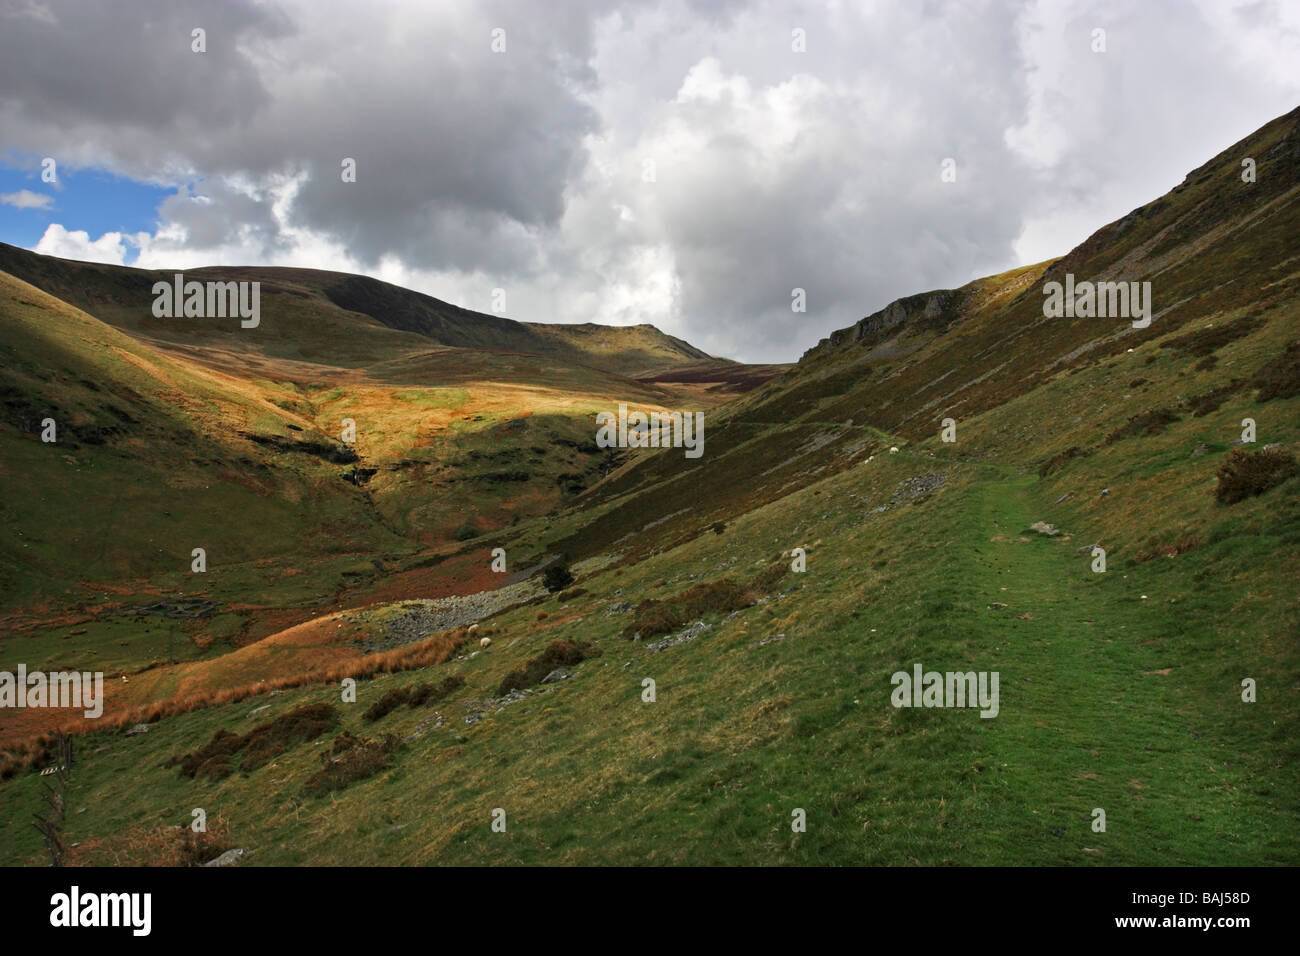 The main Berwyns ridge, North Wales, showing Moel Sych and Cadair Berwyn on the approach from Tan y Pistyll Stock Photo